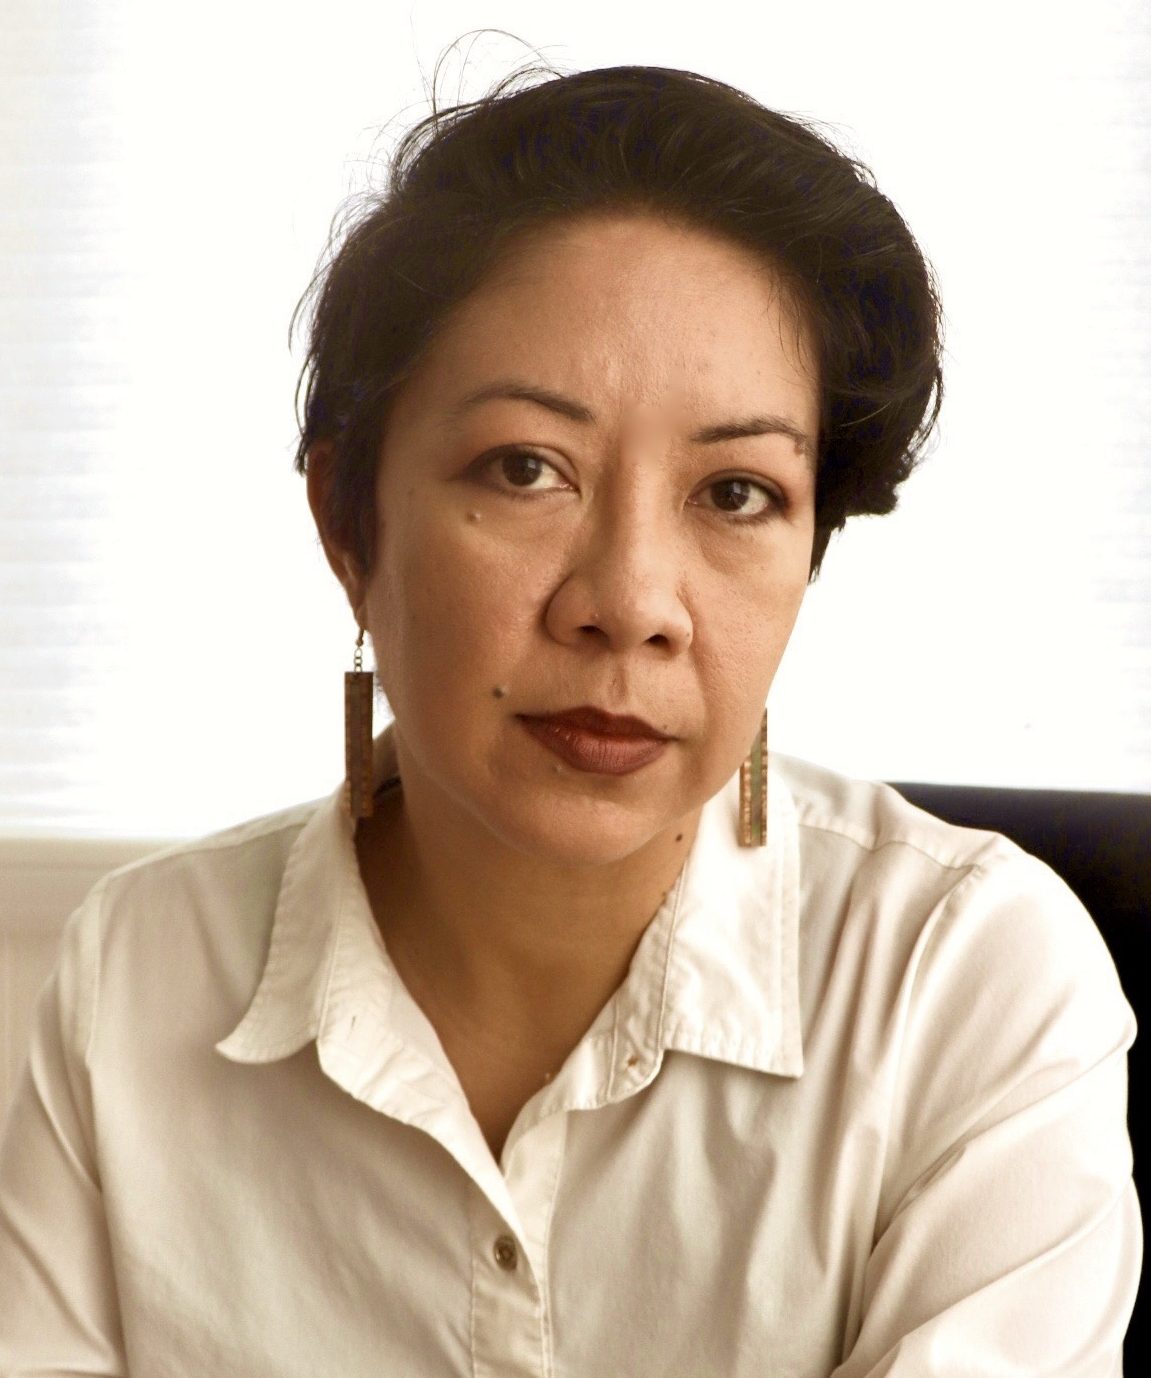 A middle-aged woman with short dark hair wearing a white blouse and triangular earrings, sitting against a lightly shaded background, facing the camera with a serious expression.